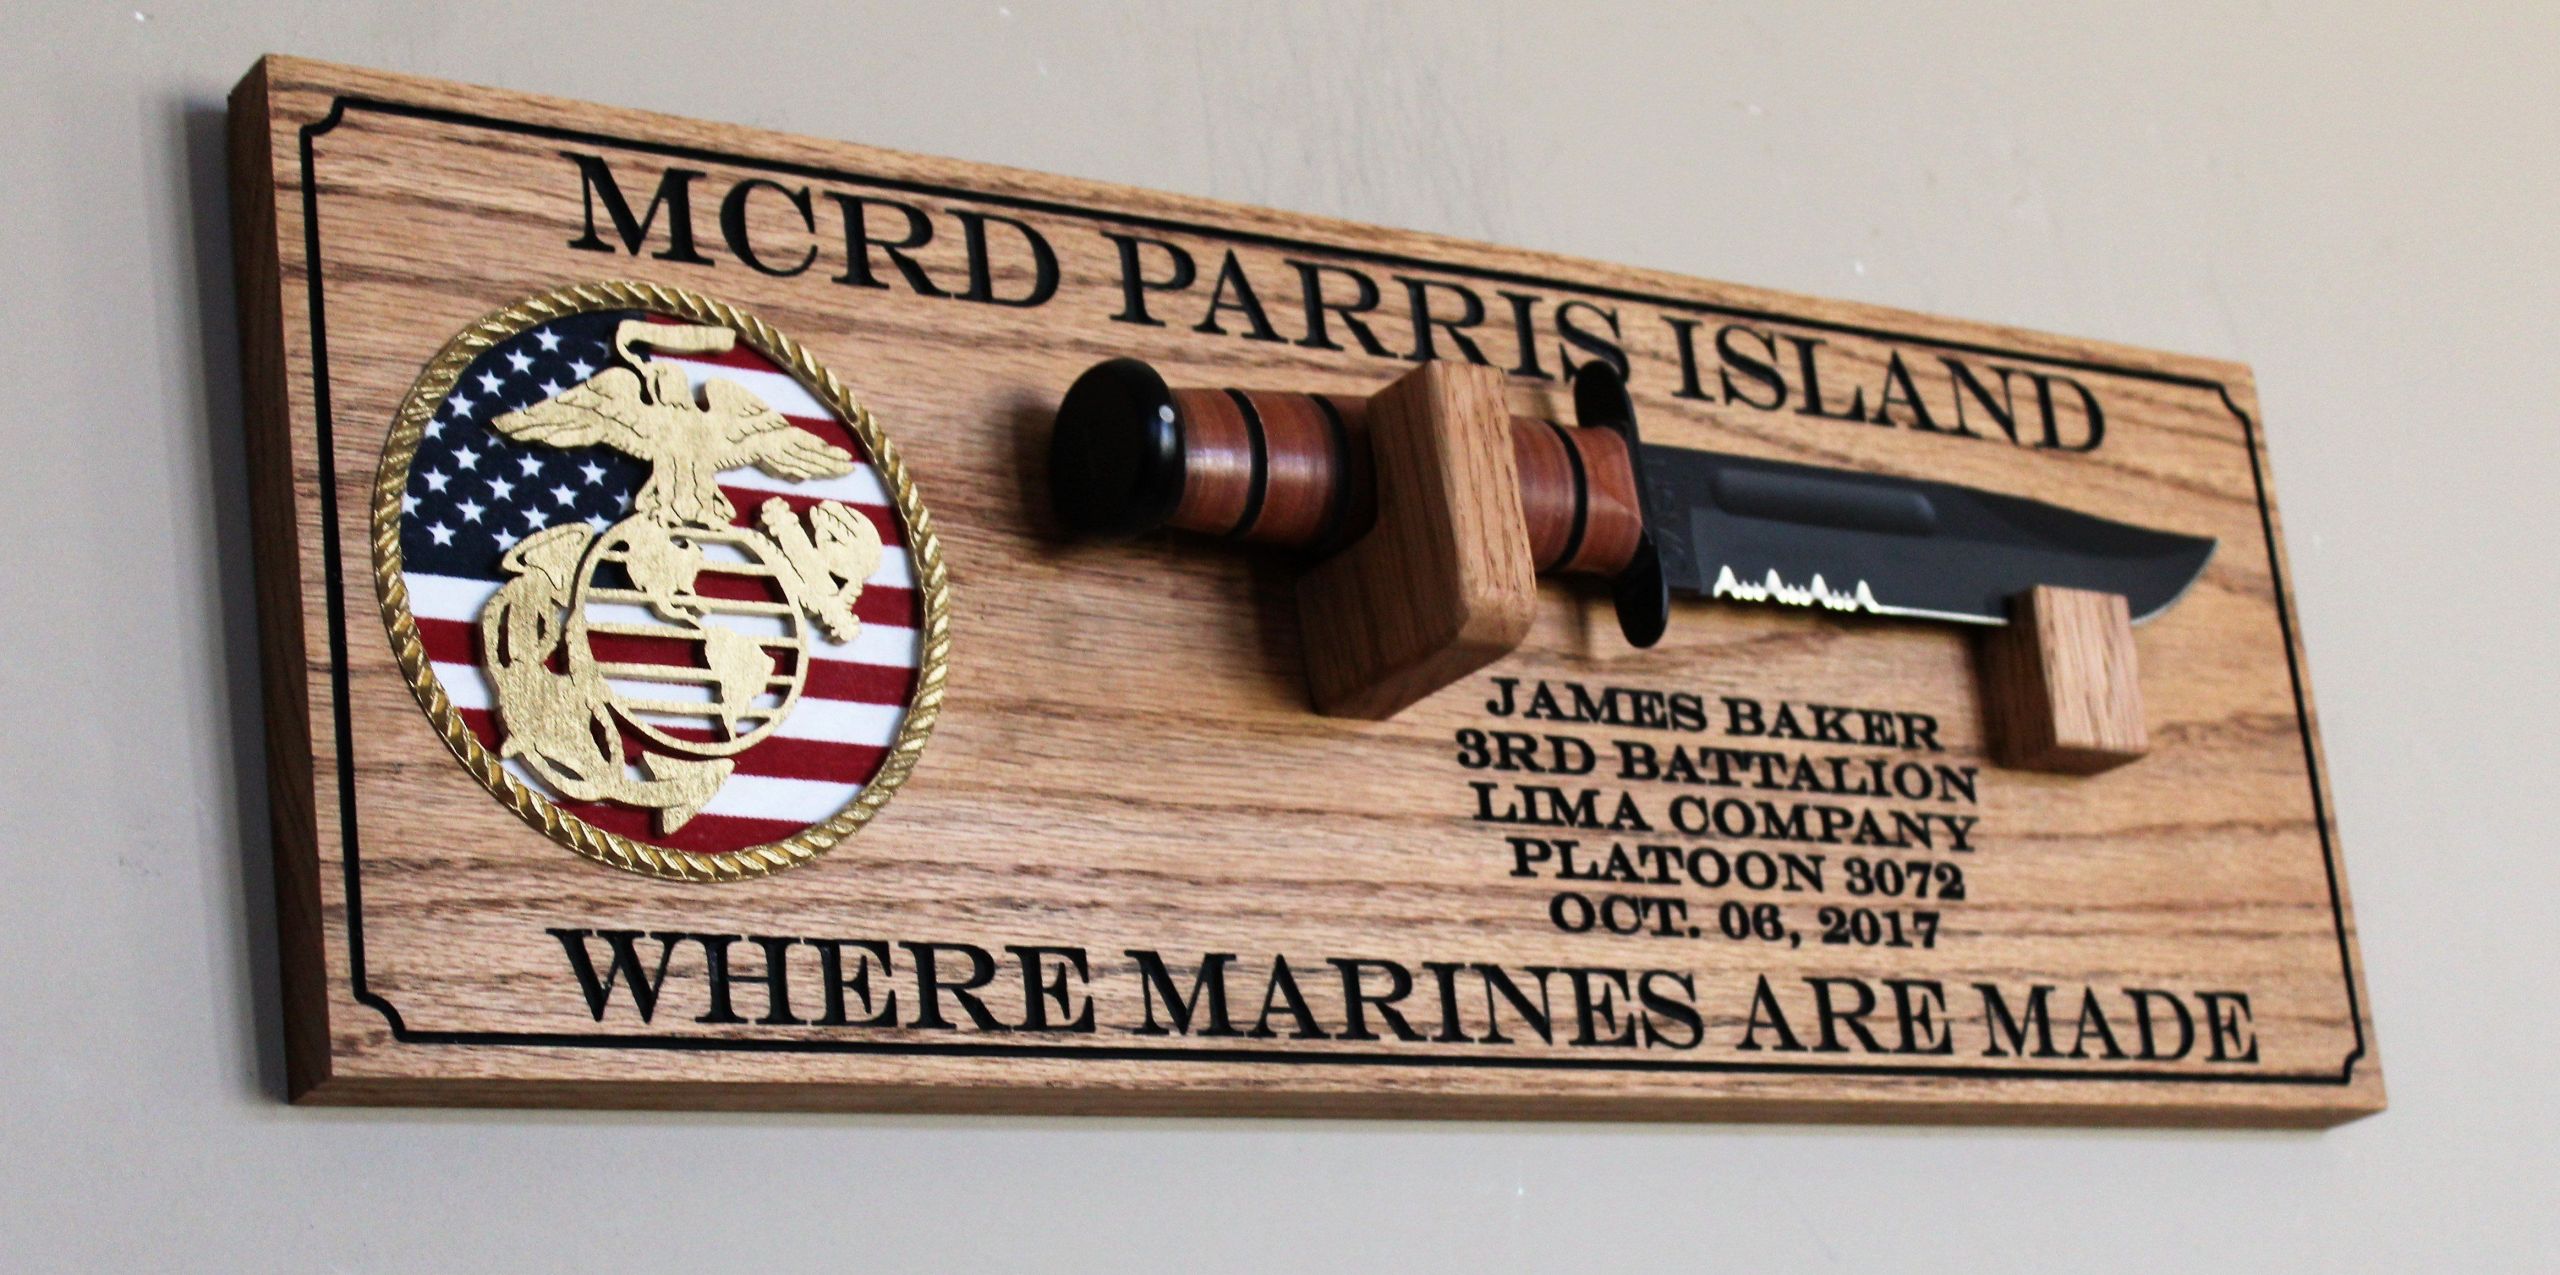 Marine Graduation Gift Ideas
 USMC Wall Mount Display Carved Wood Plaque Personalized